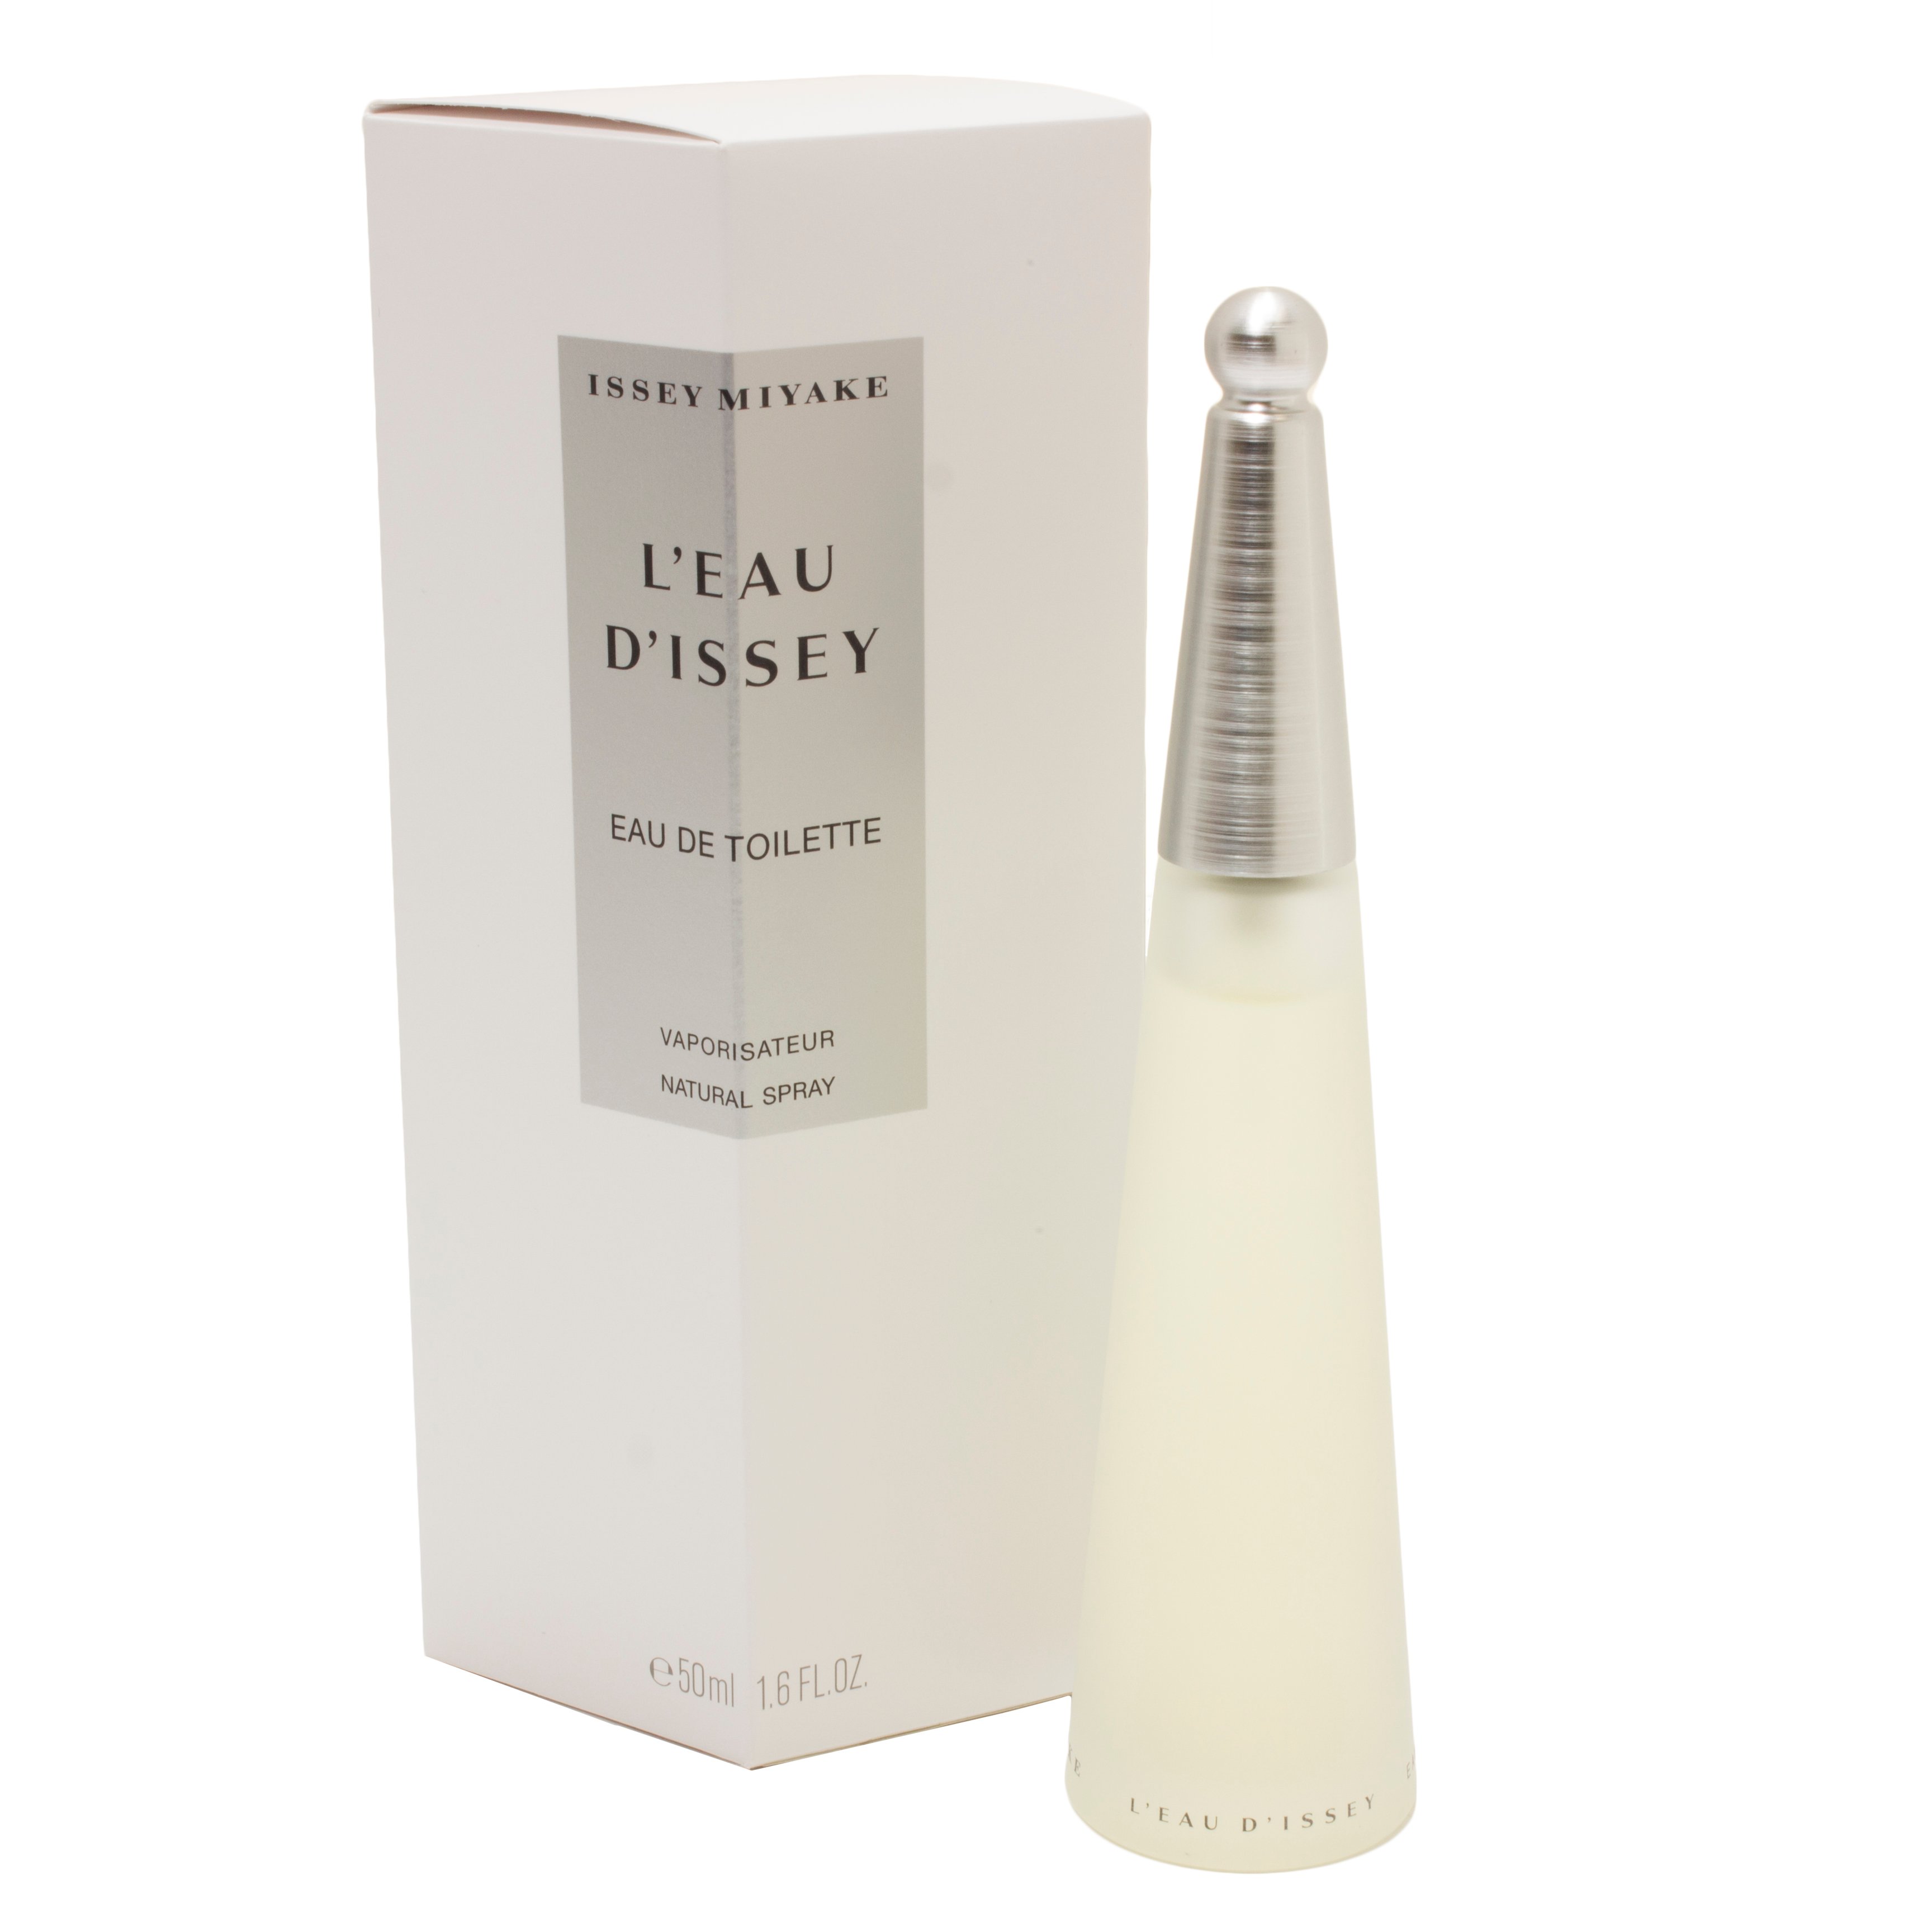 Issey Miyake L'Eau d'Issey - Shop Fragrance at H-E-B